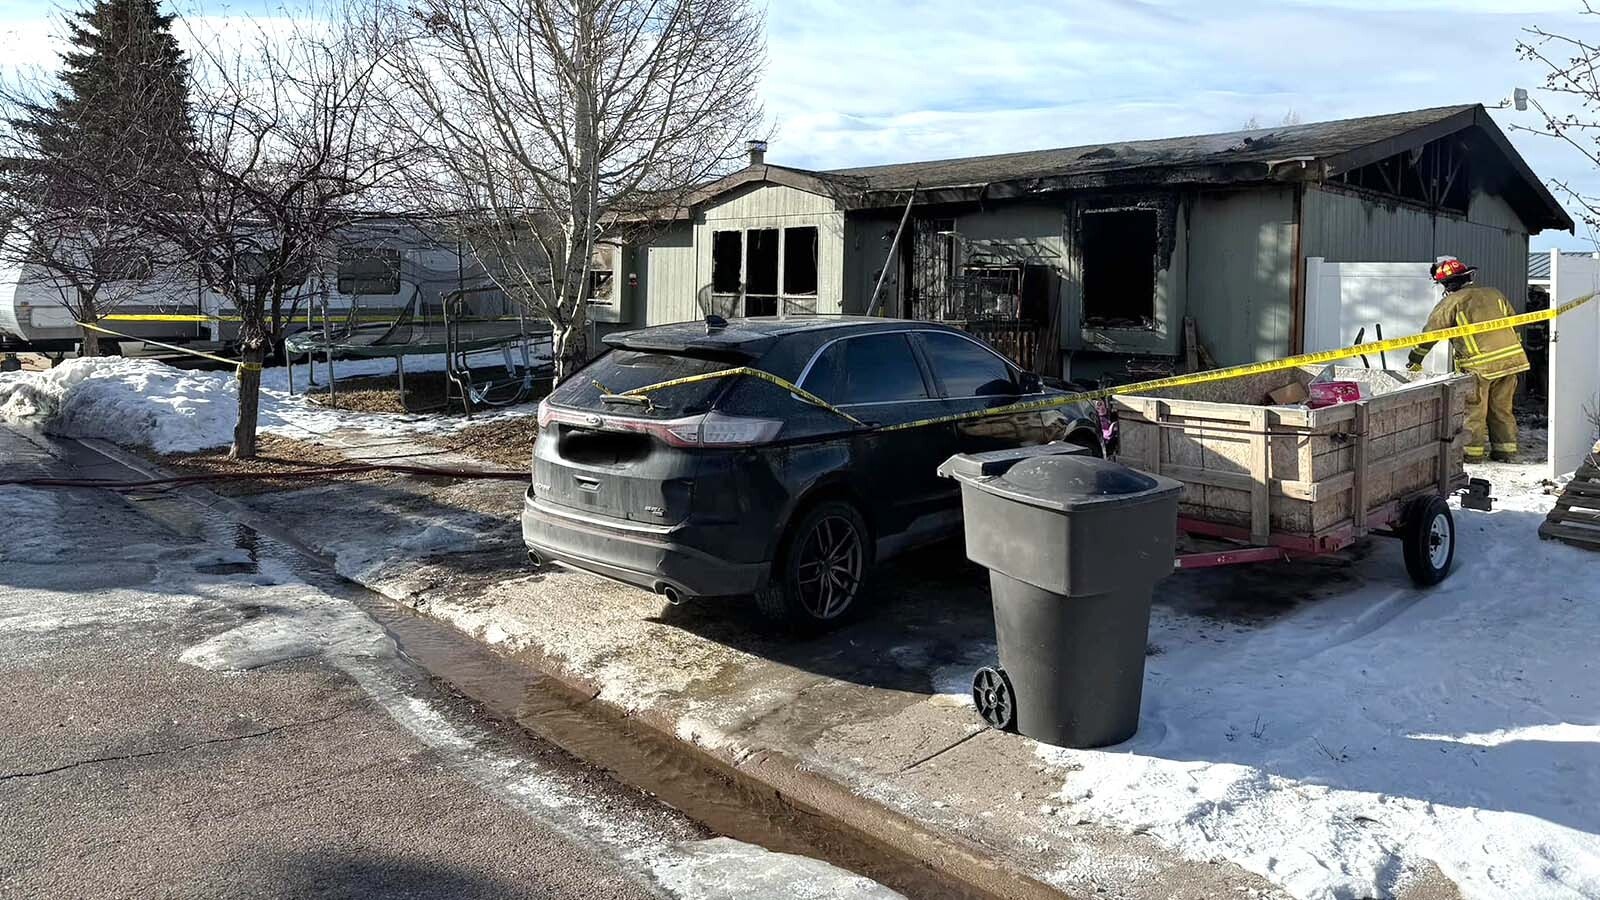 A Uinta County firefighter cleans up Saturday after an early morning fire in this mobile home on Worland Circle in Evanston that claimed the lives of two children, ages 6 and 3, and an adult family member.